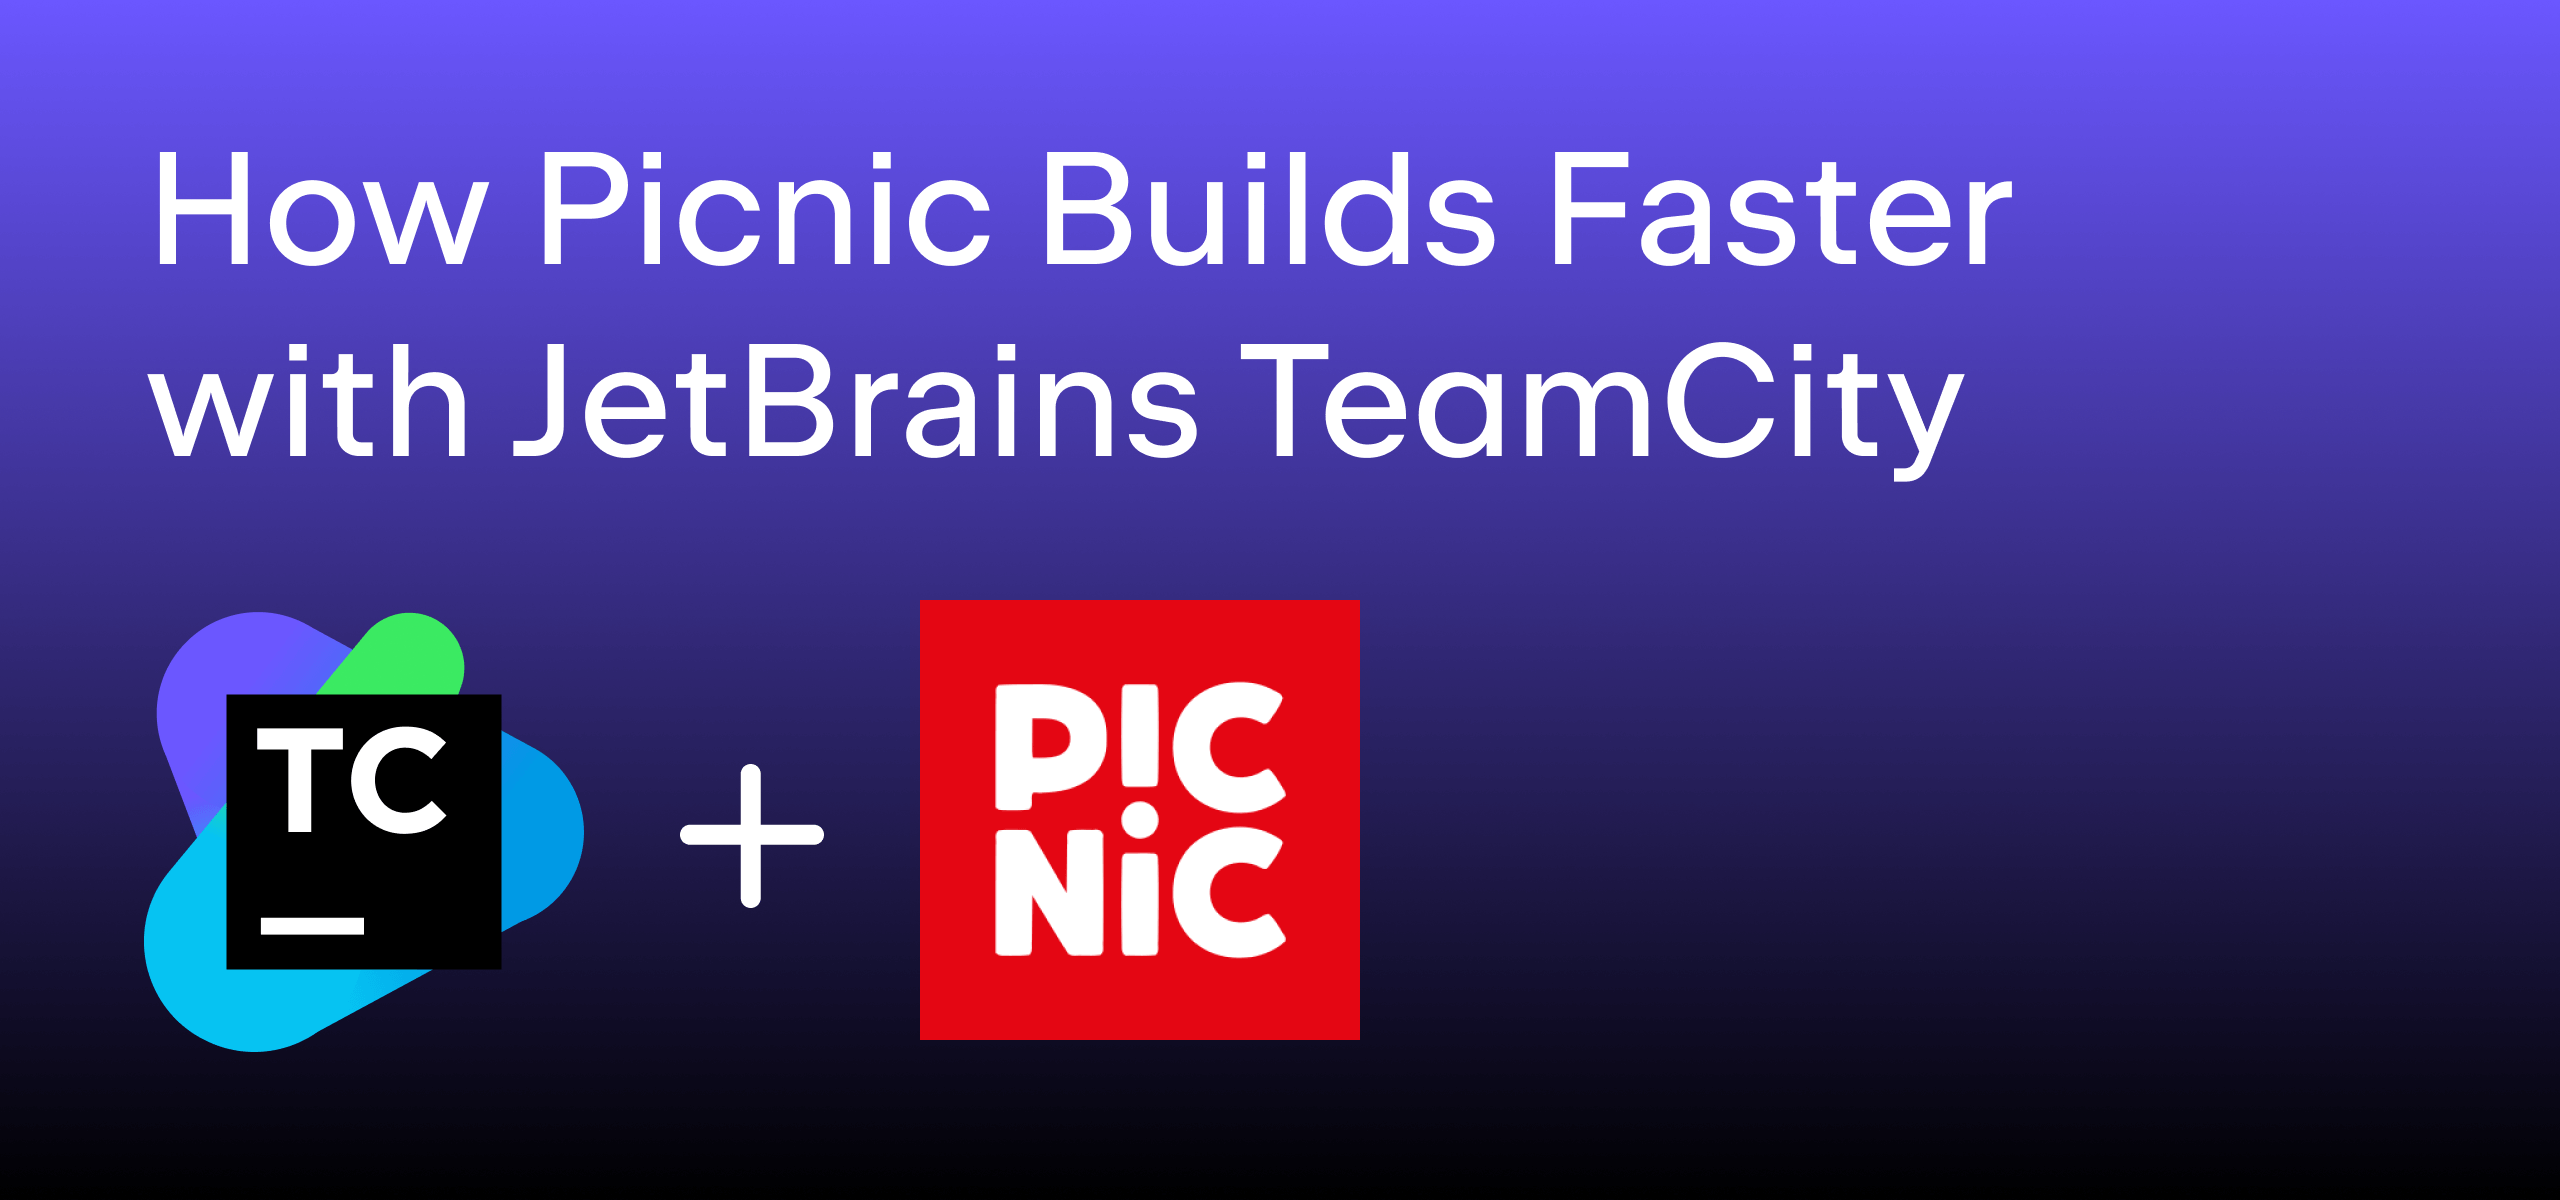 how picnic builds faster with teamcity